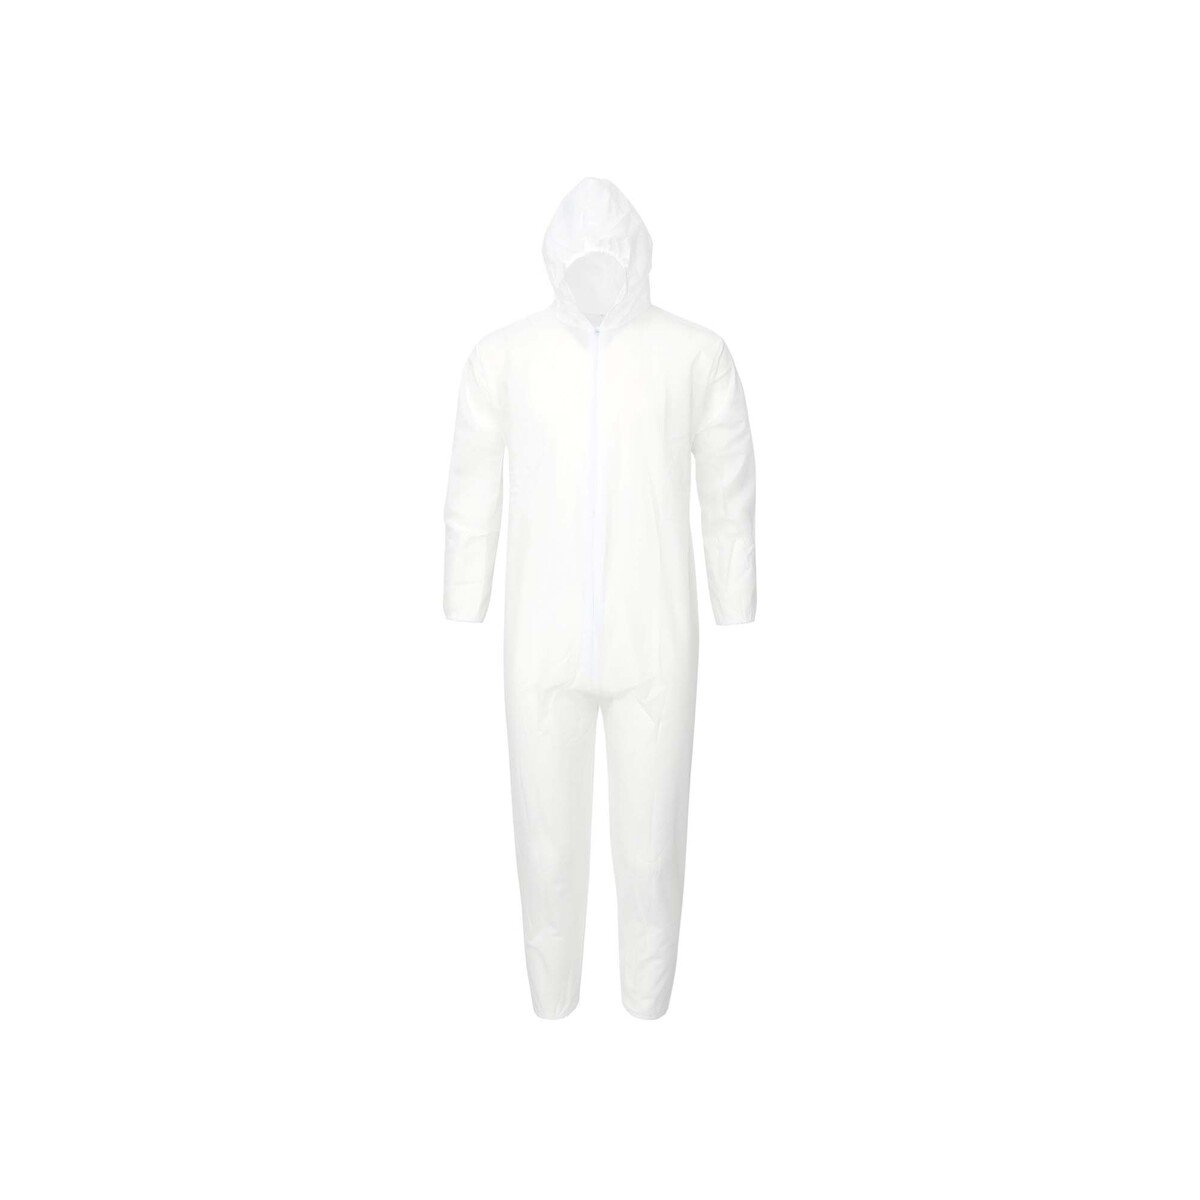 Protect Plus Child Cover All White Assorted